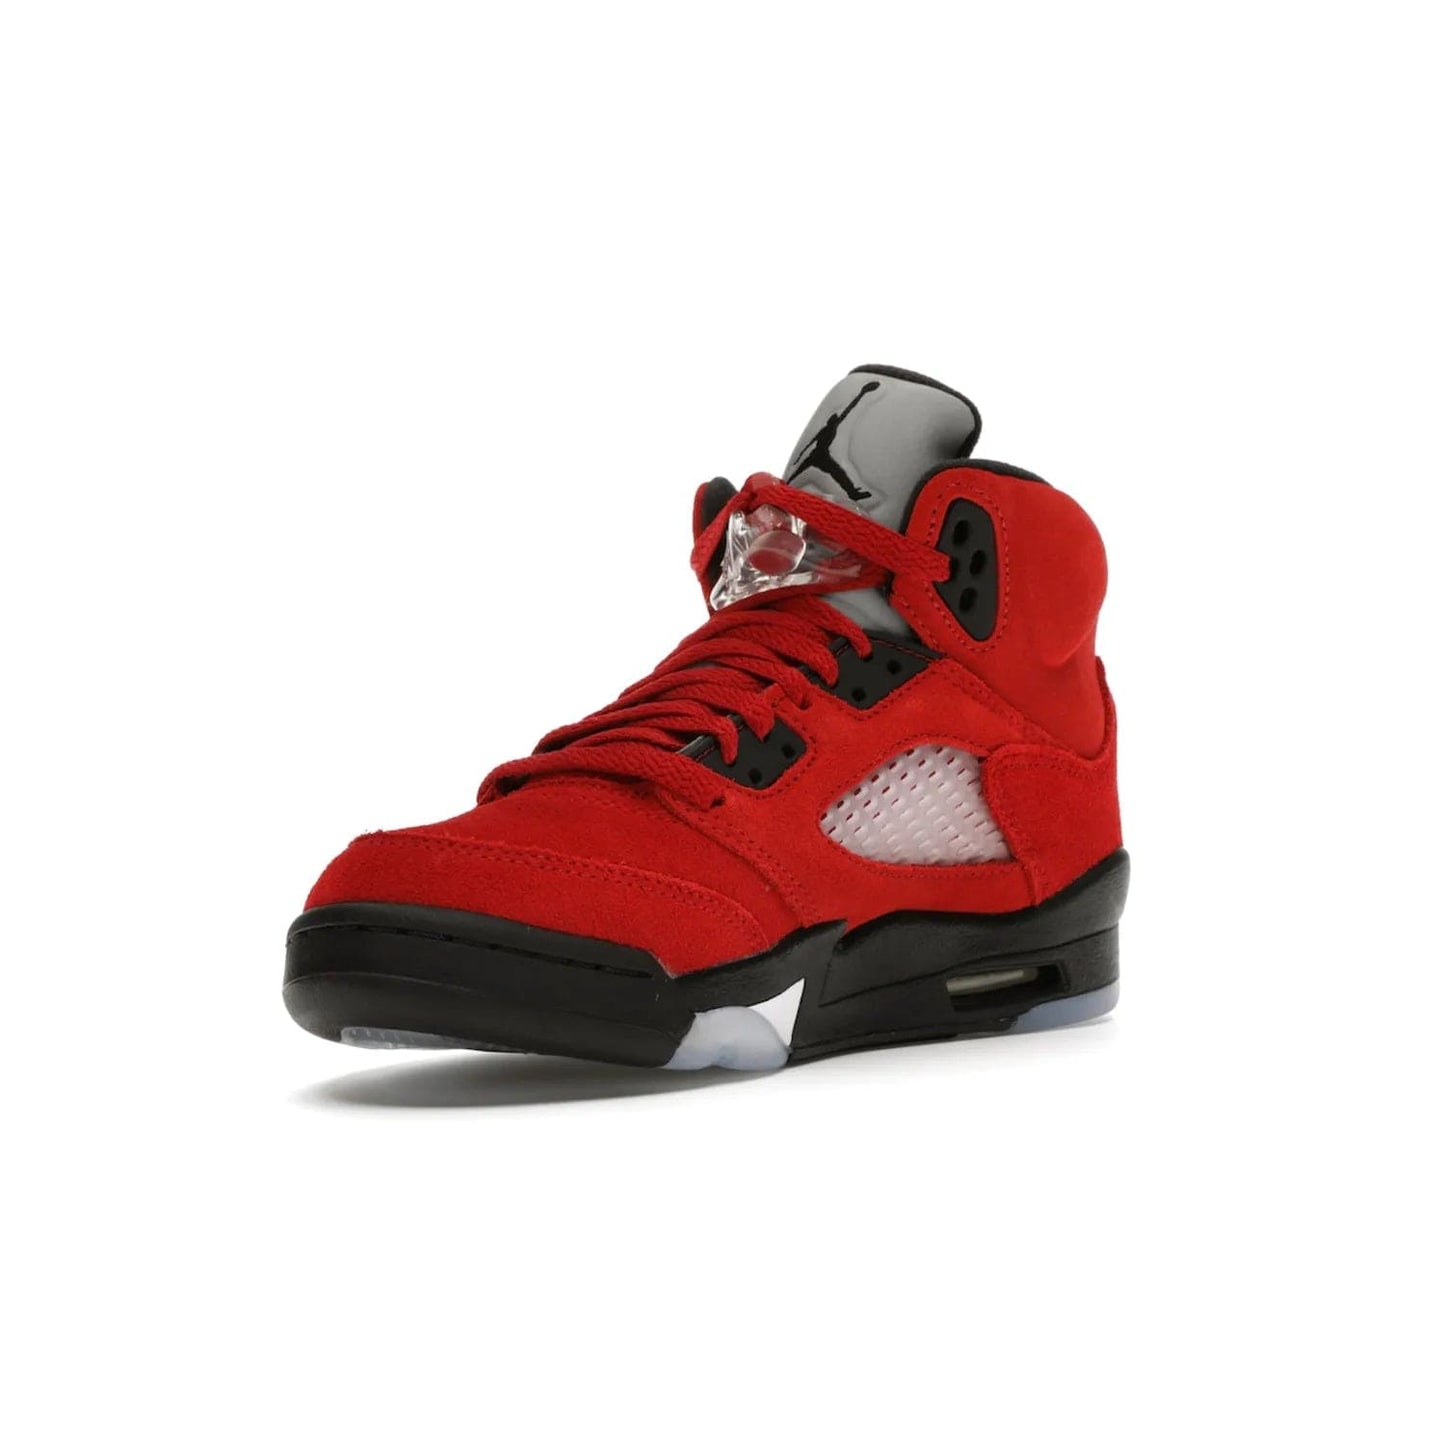 Jordan 5 Retro Raging Bull Red (2021) (GS) - Image 14 - Only at www.BallersClubKickz.com - Jordan 5 Retro Raging Bulls Red 2021 GS. Varsity Red suede upper with embroidered number 23, black leather detail, red laces, and midsole with air cushioning. Jumpman logos on tongue, heel, and outsole. On-trend streetwear and basketball style. Released April 10, 2021.